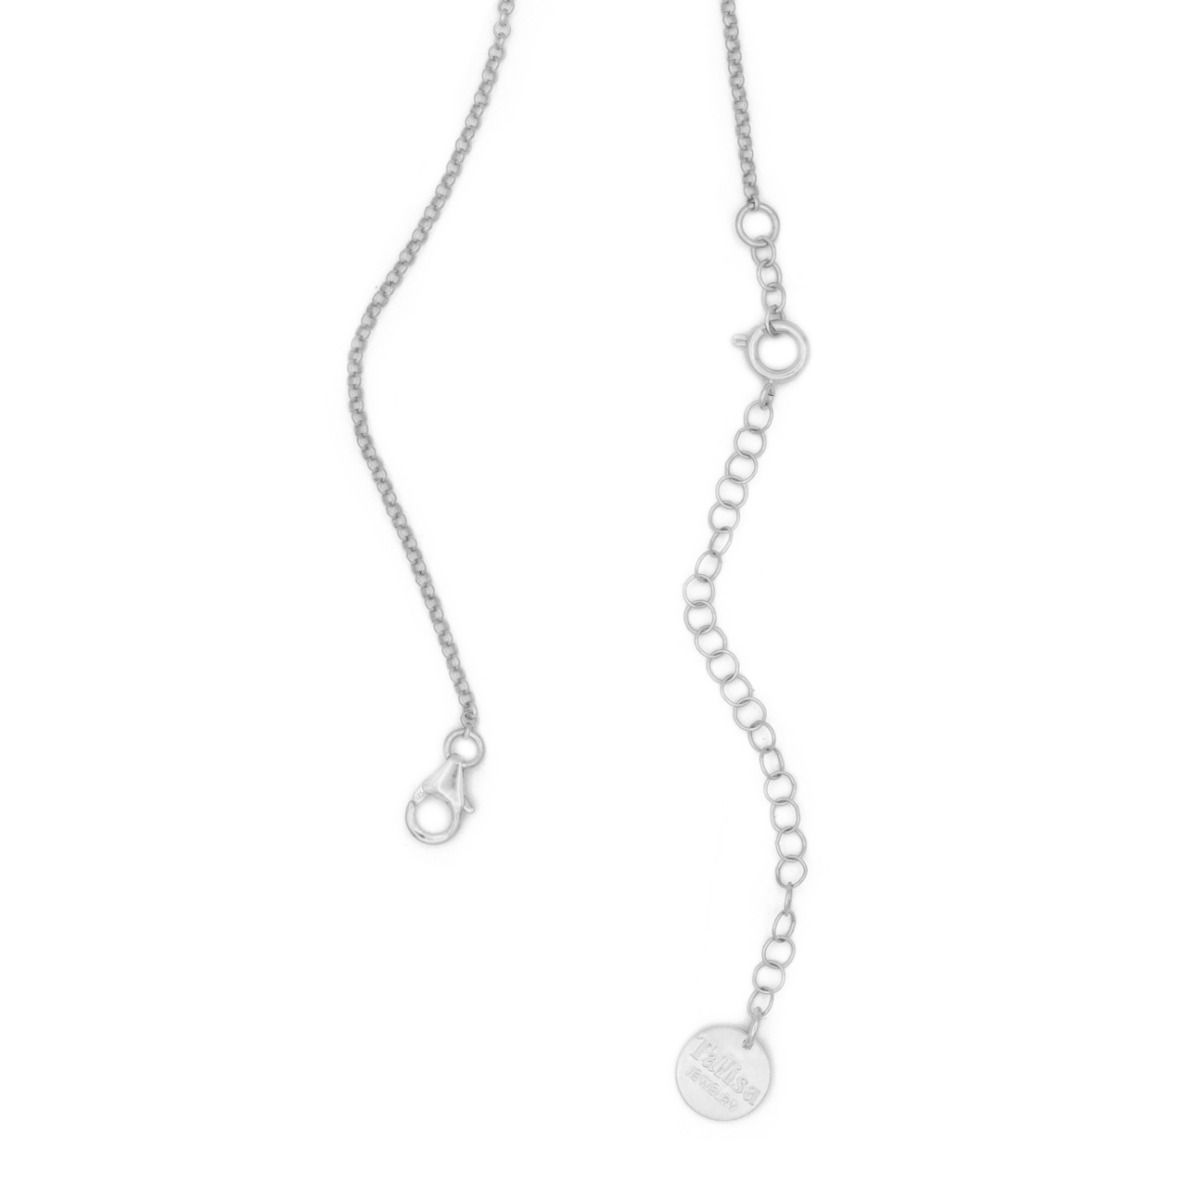 925 Sterling Silver Adjustable, ChaiSilver Necklace Extender. Stainles –  Anavia Jewelry & Gift